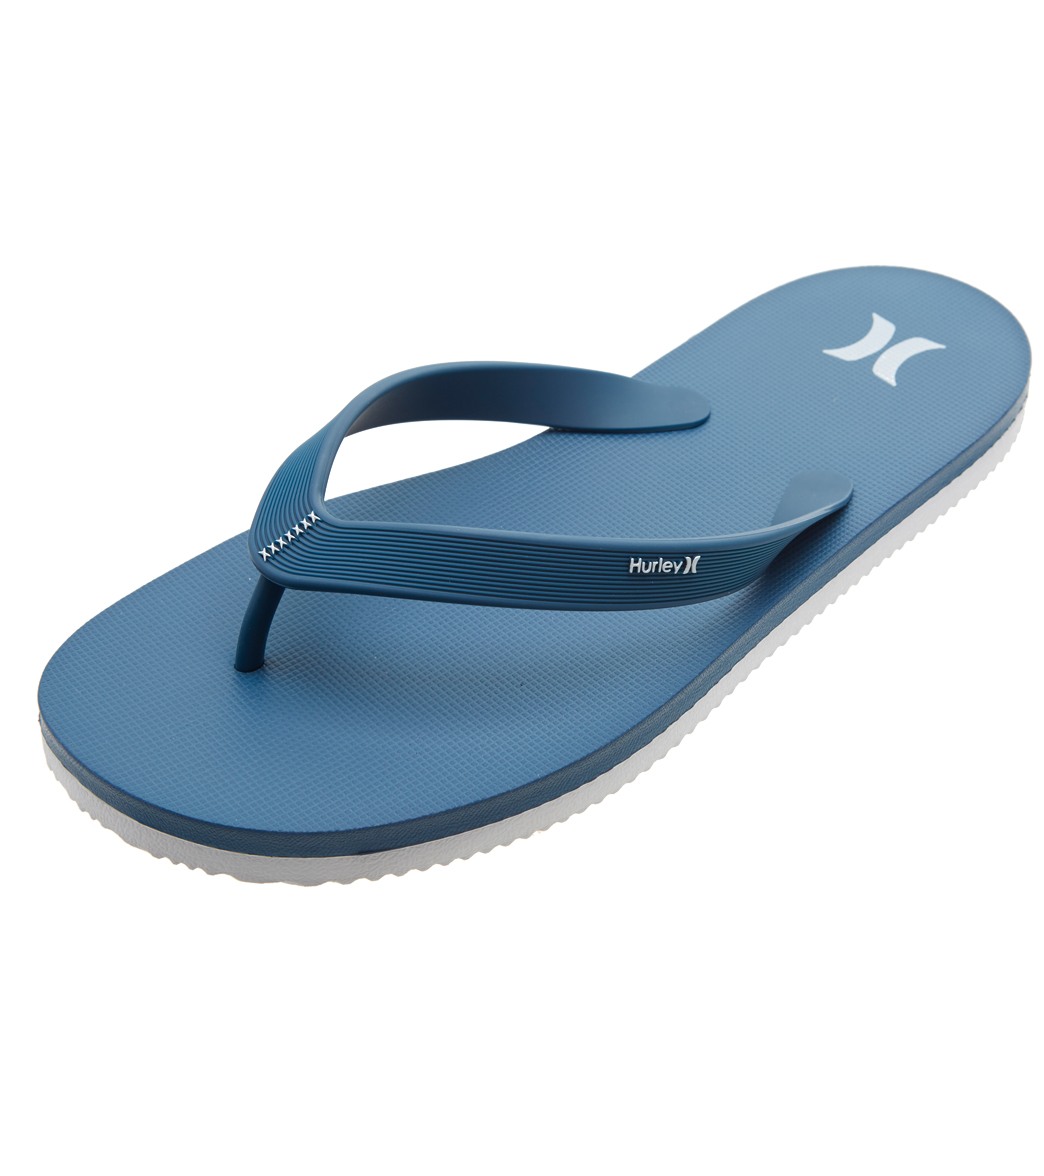 hurley one and only flip flops